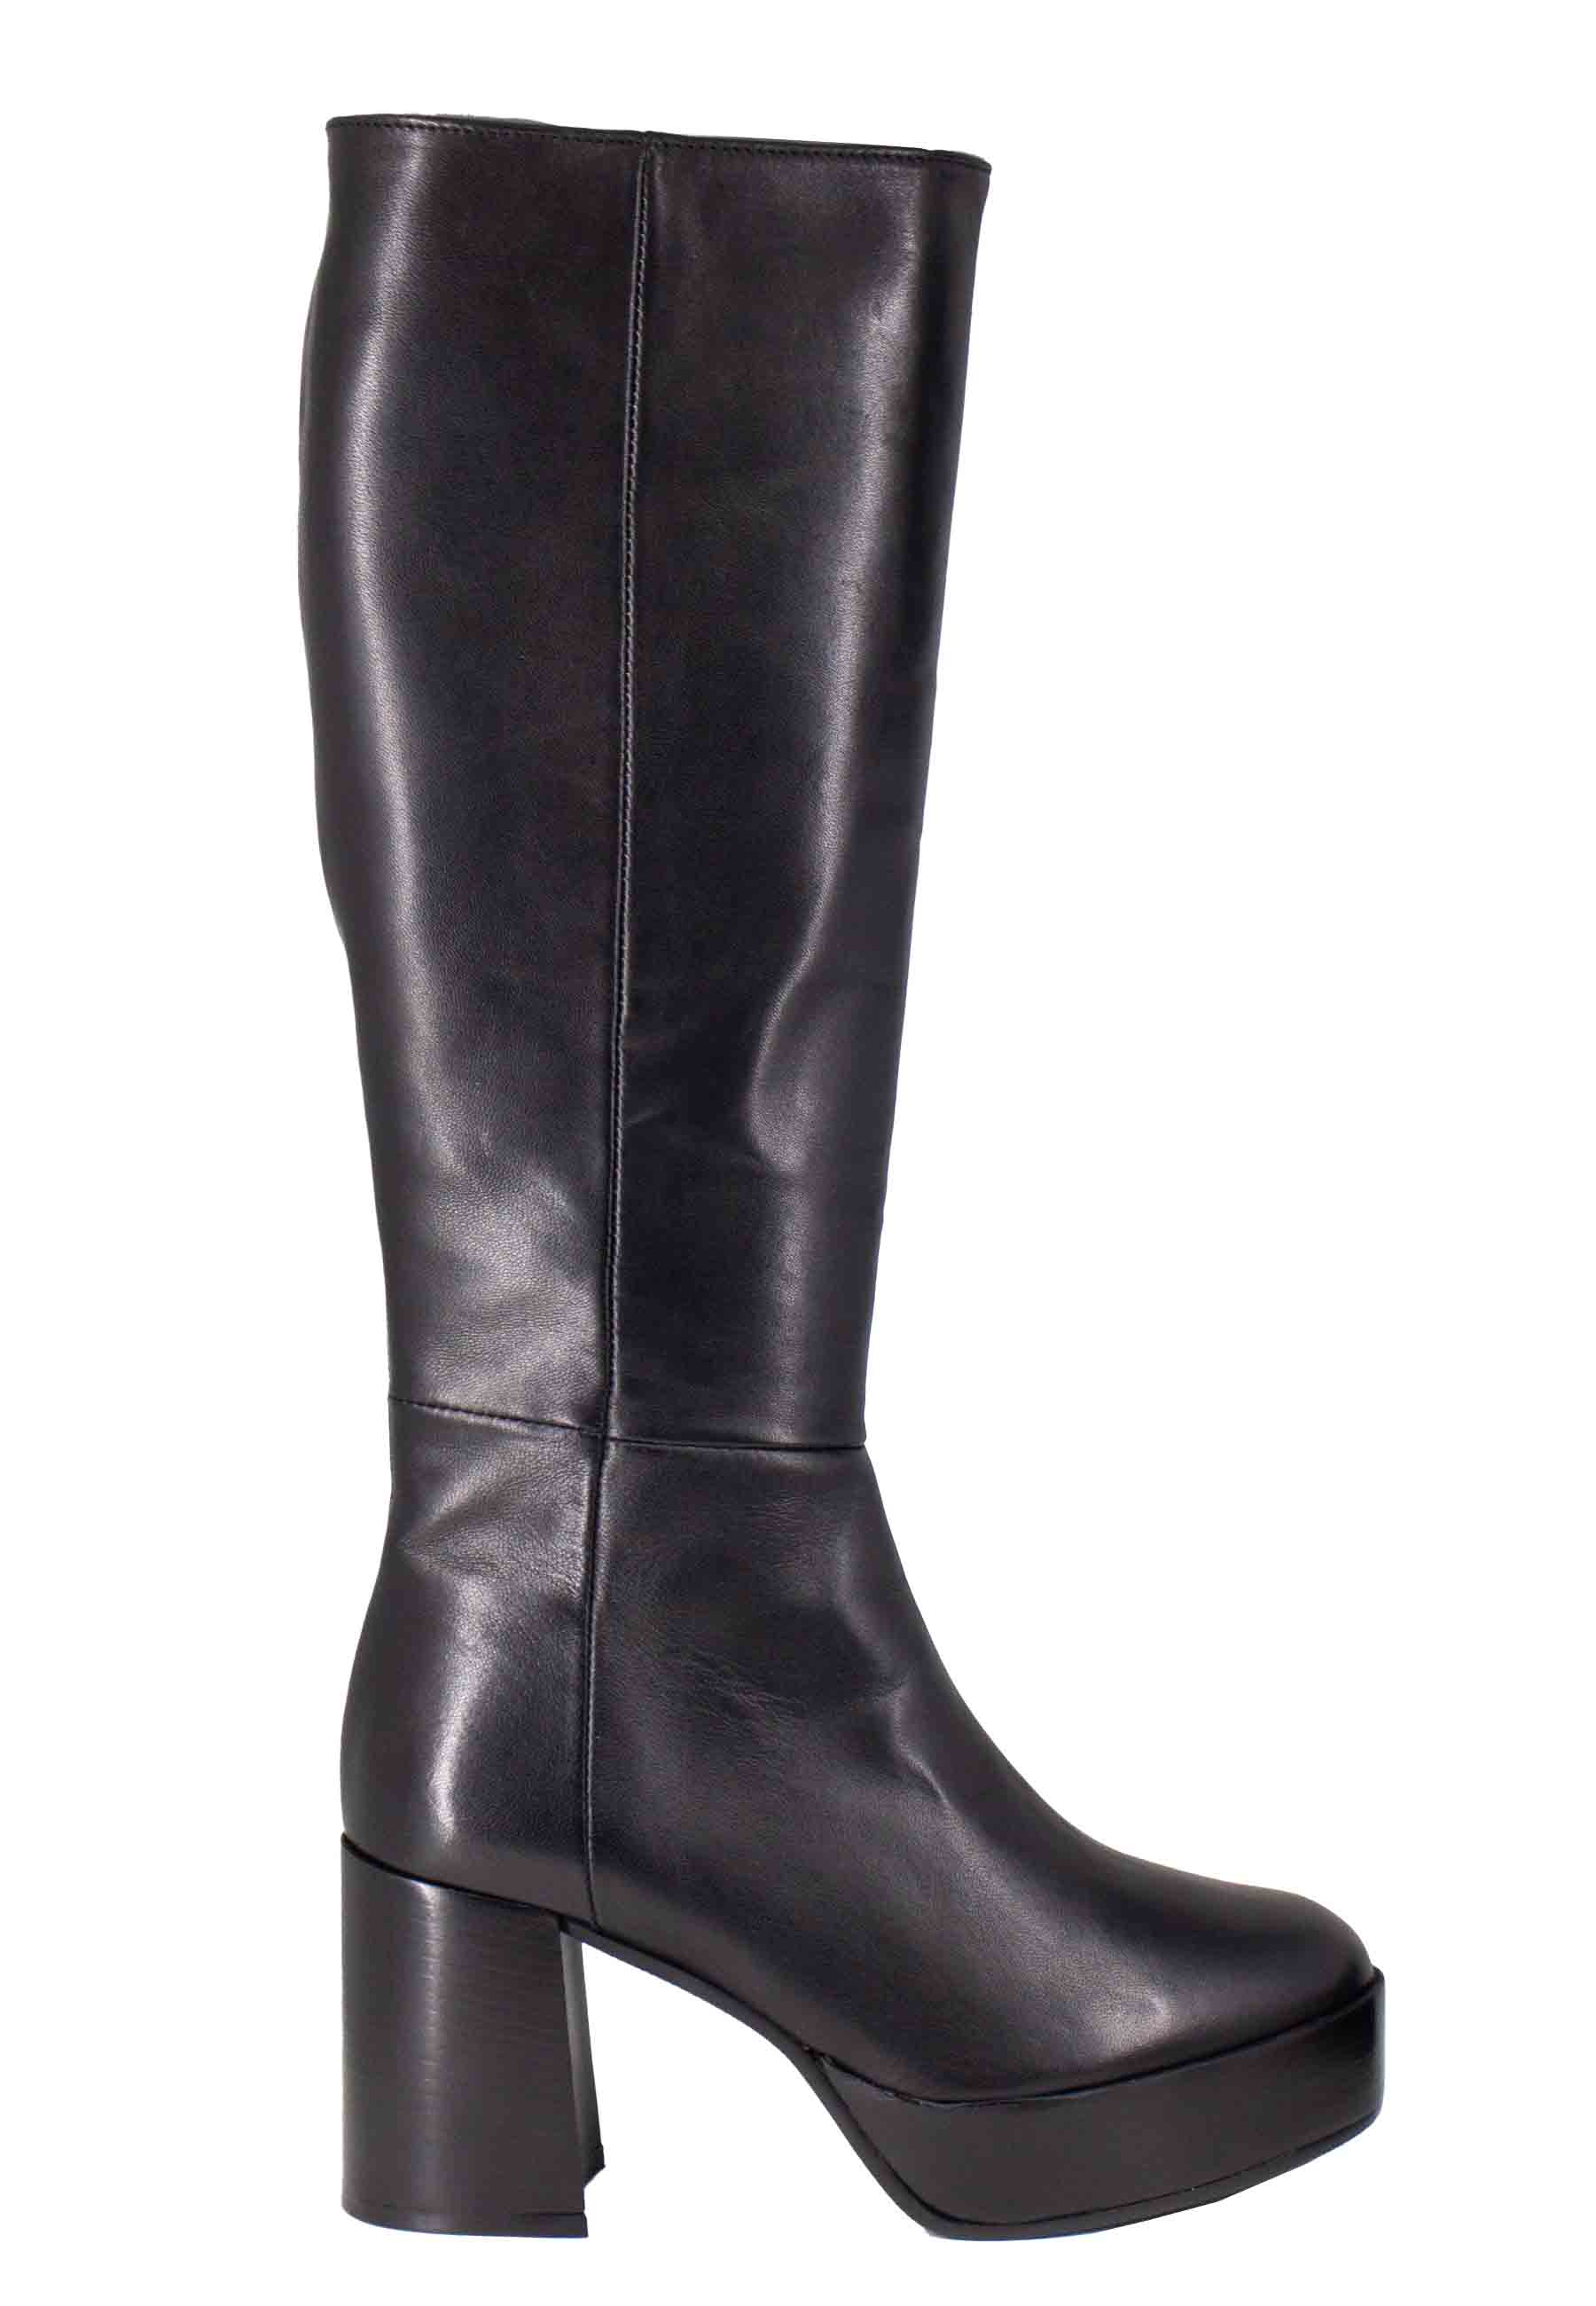 Women's black leather boots with heel and platform